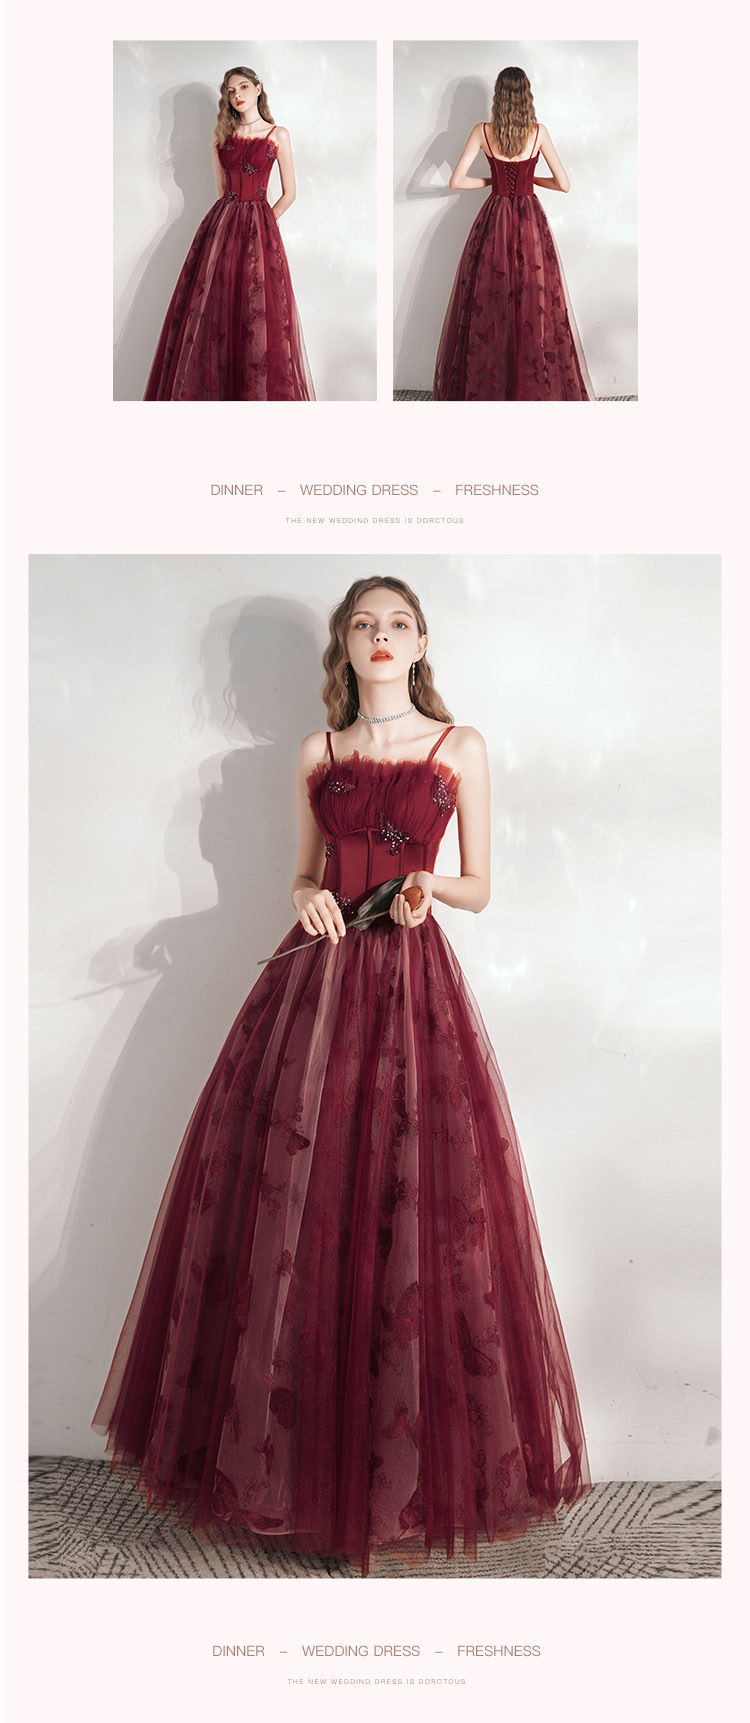 Unique-Wine-Red-Maxi-Prom-Dress-Formal-Party-Evening-Gown12.jpg